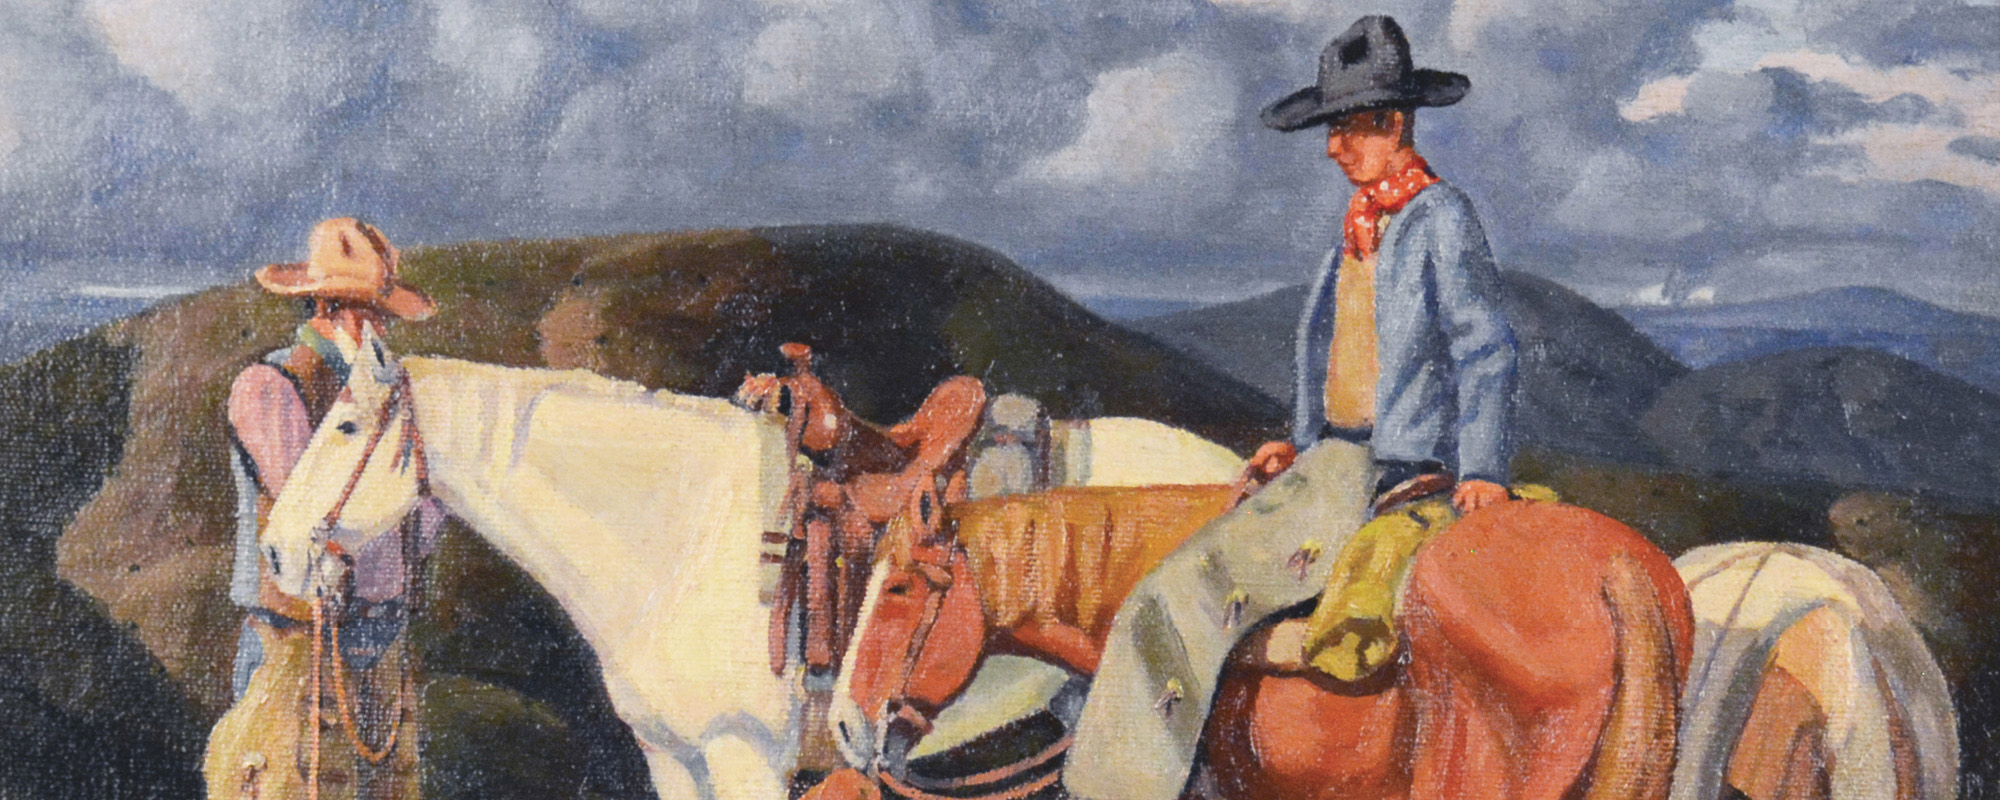 Oil painting of two cowboys and their horses.